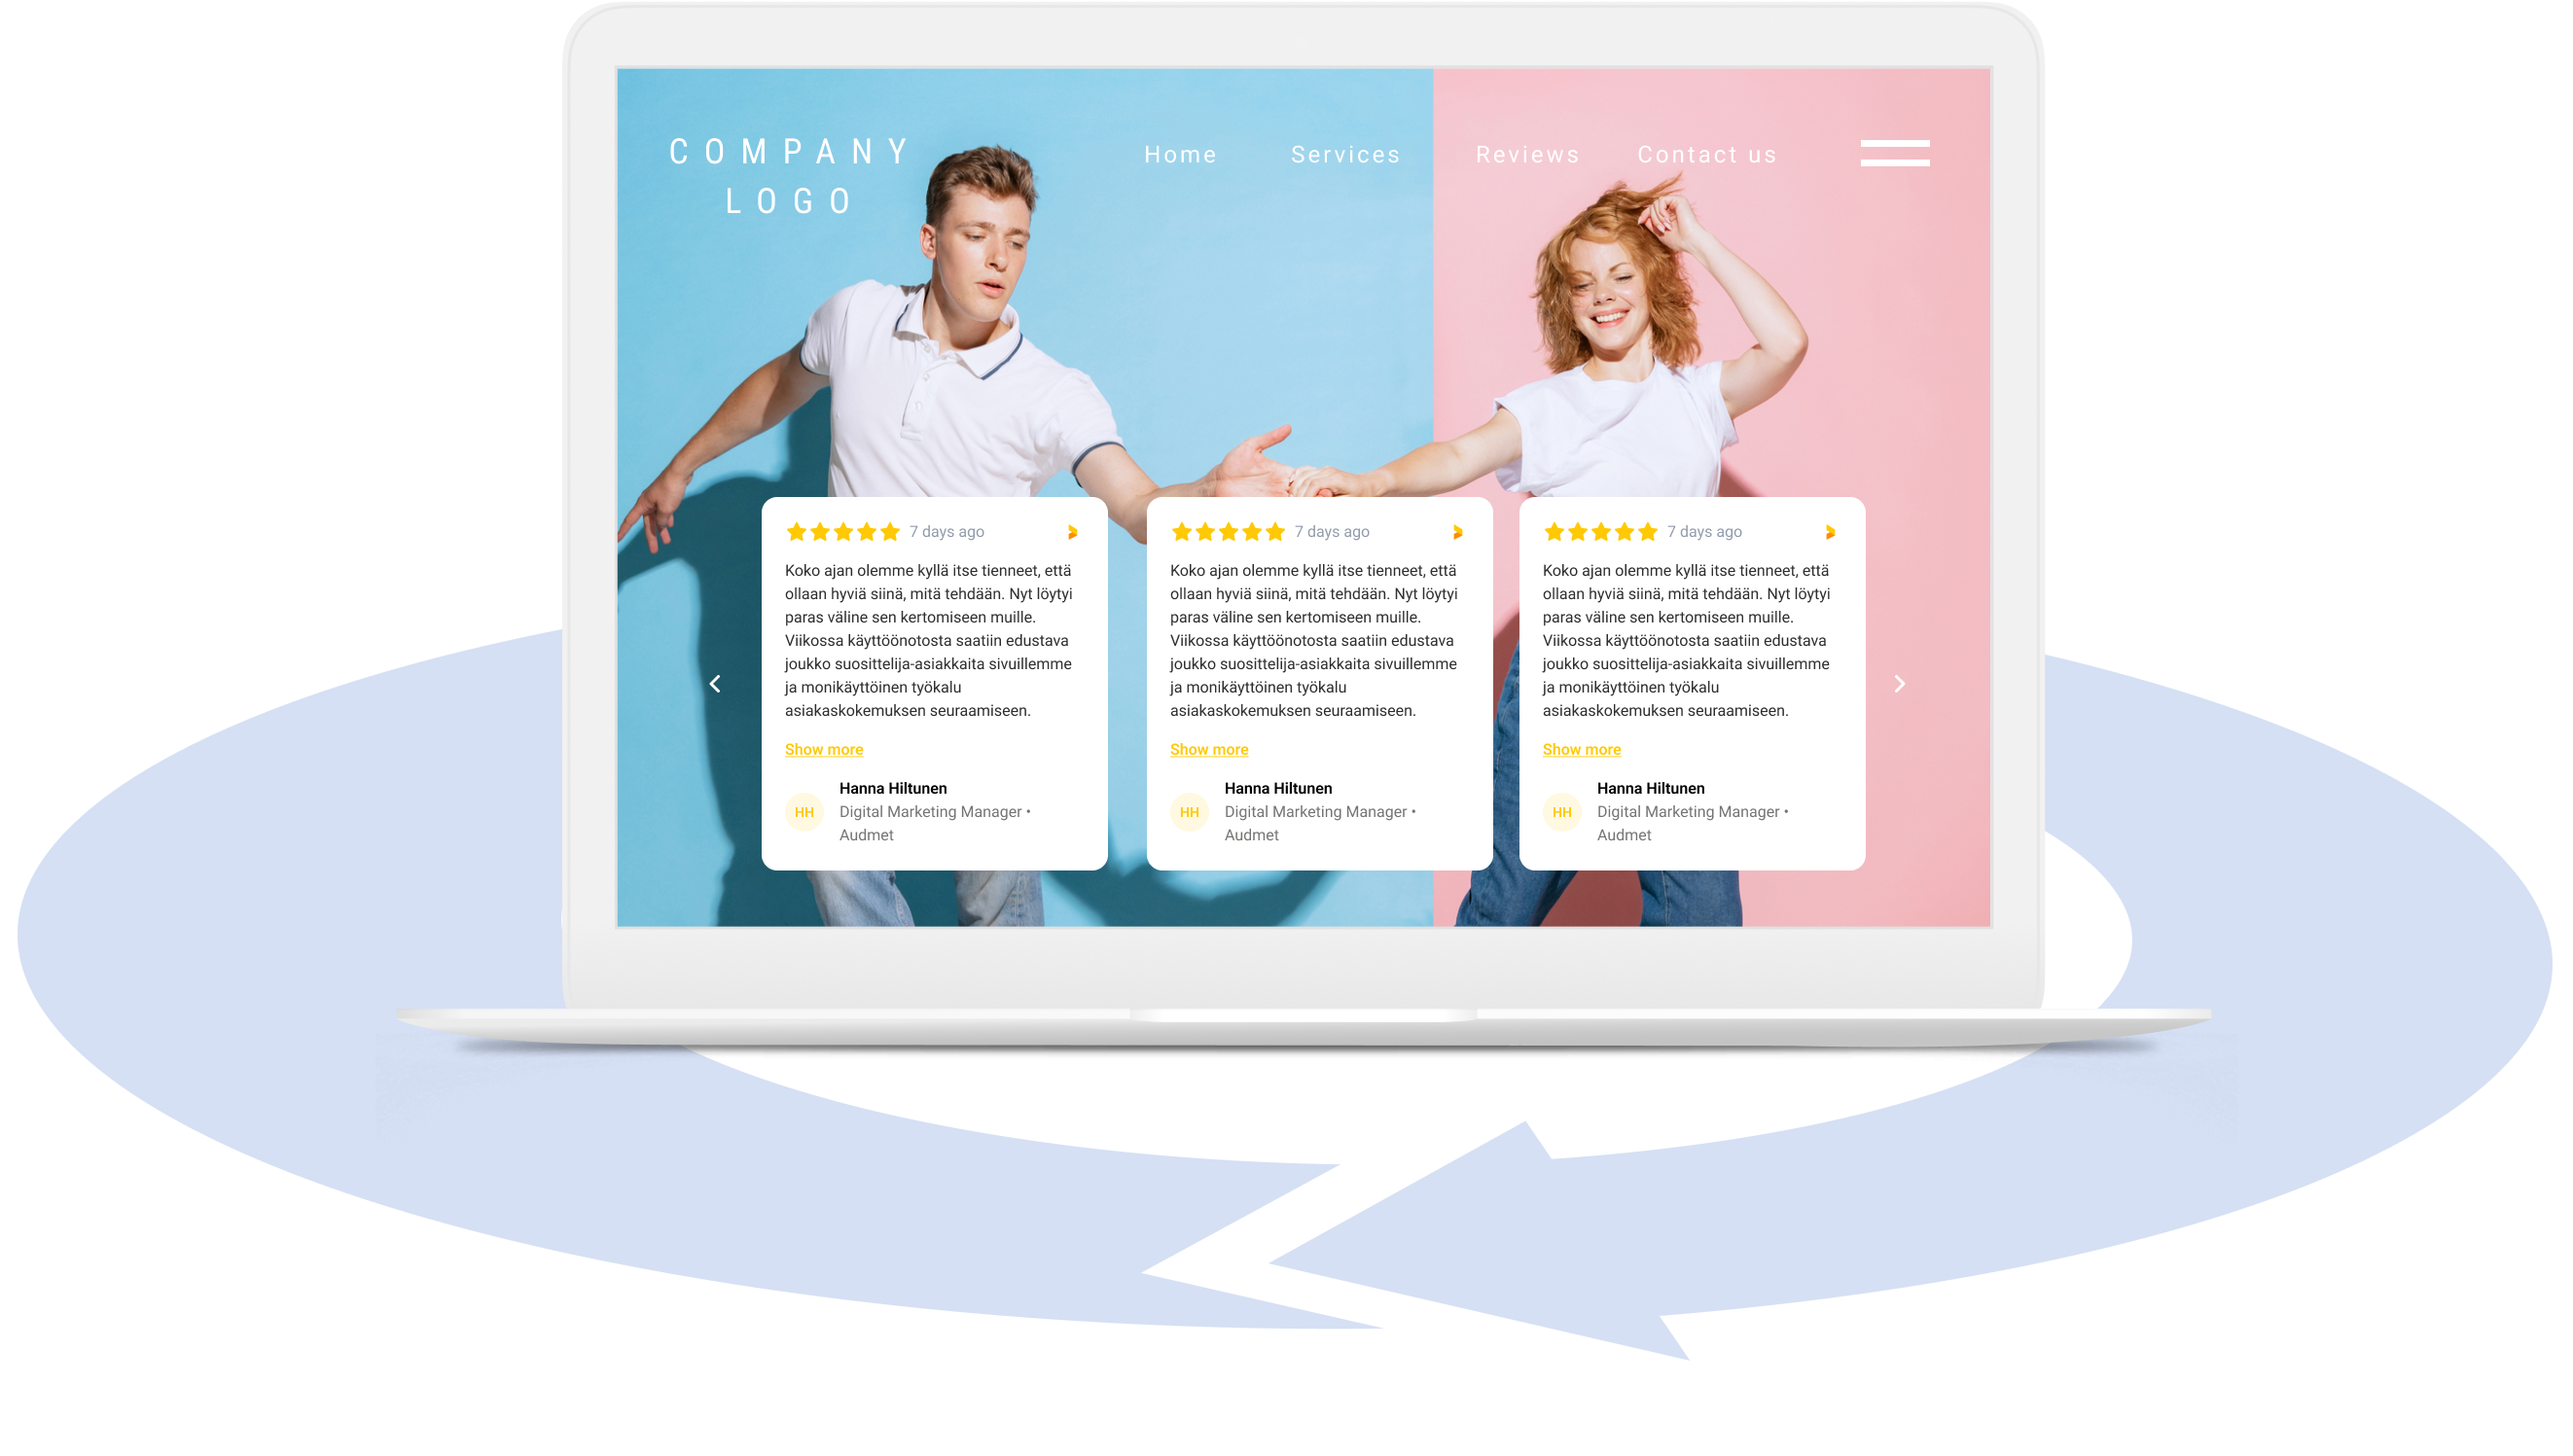 a mockup website that features reviews